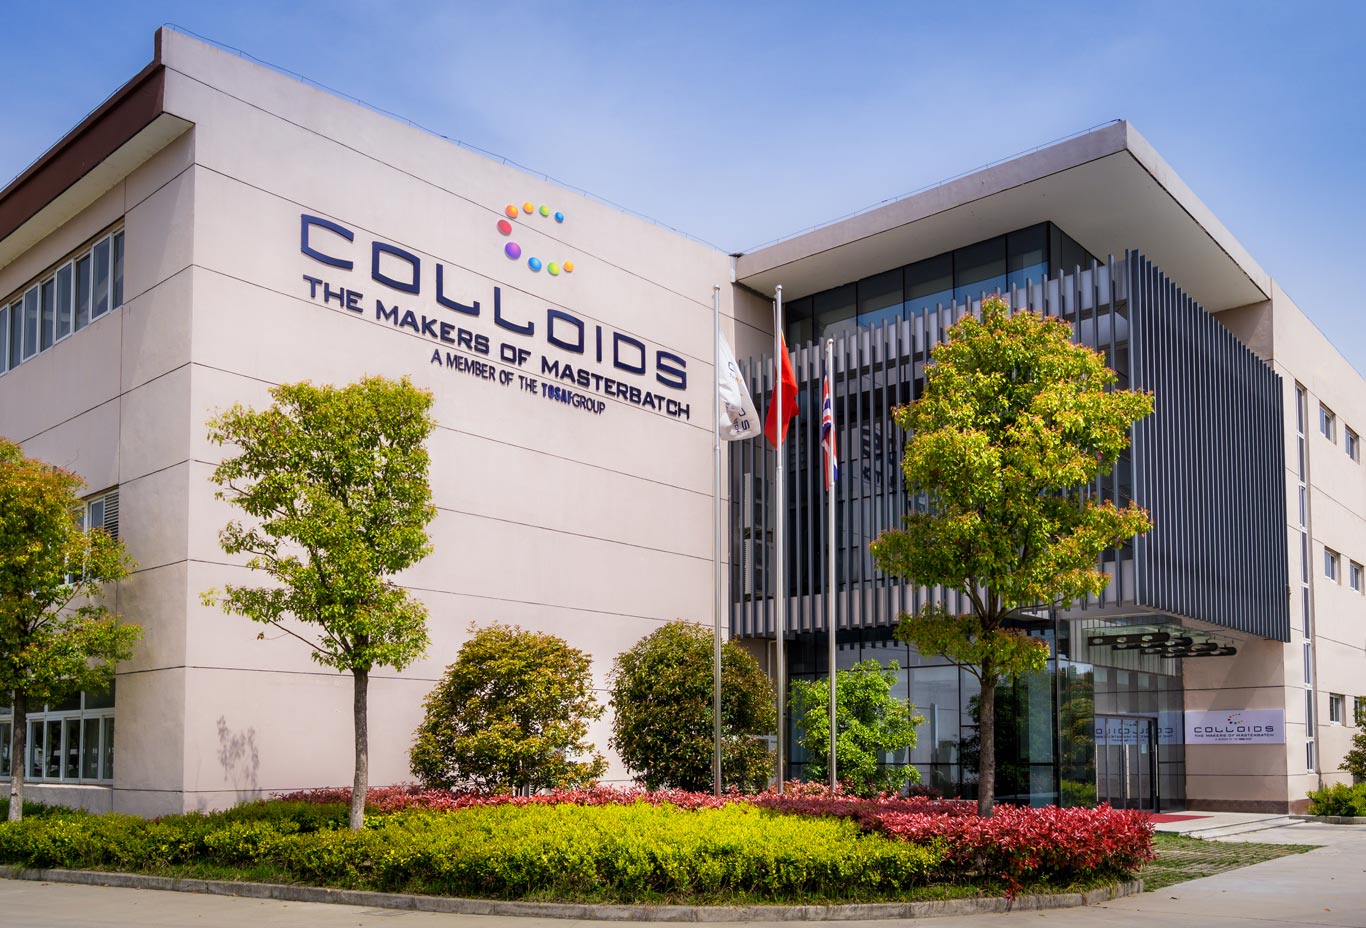 Colloids Plastic (Suzhou) Co.Ltd, located in the Changshu Economic Development Zone, a jurisdiction of Suzhou in Jiangsu province, about two hours north west of Shanghai.